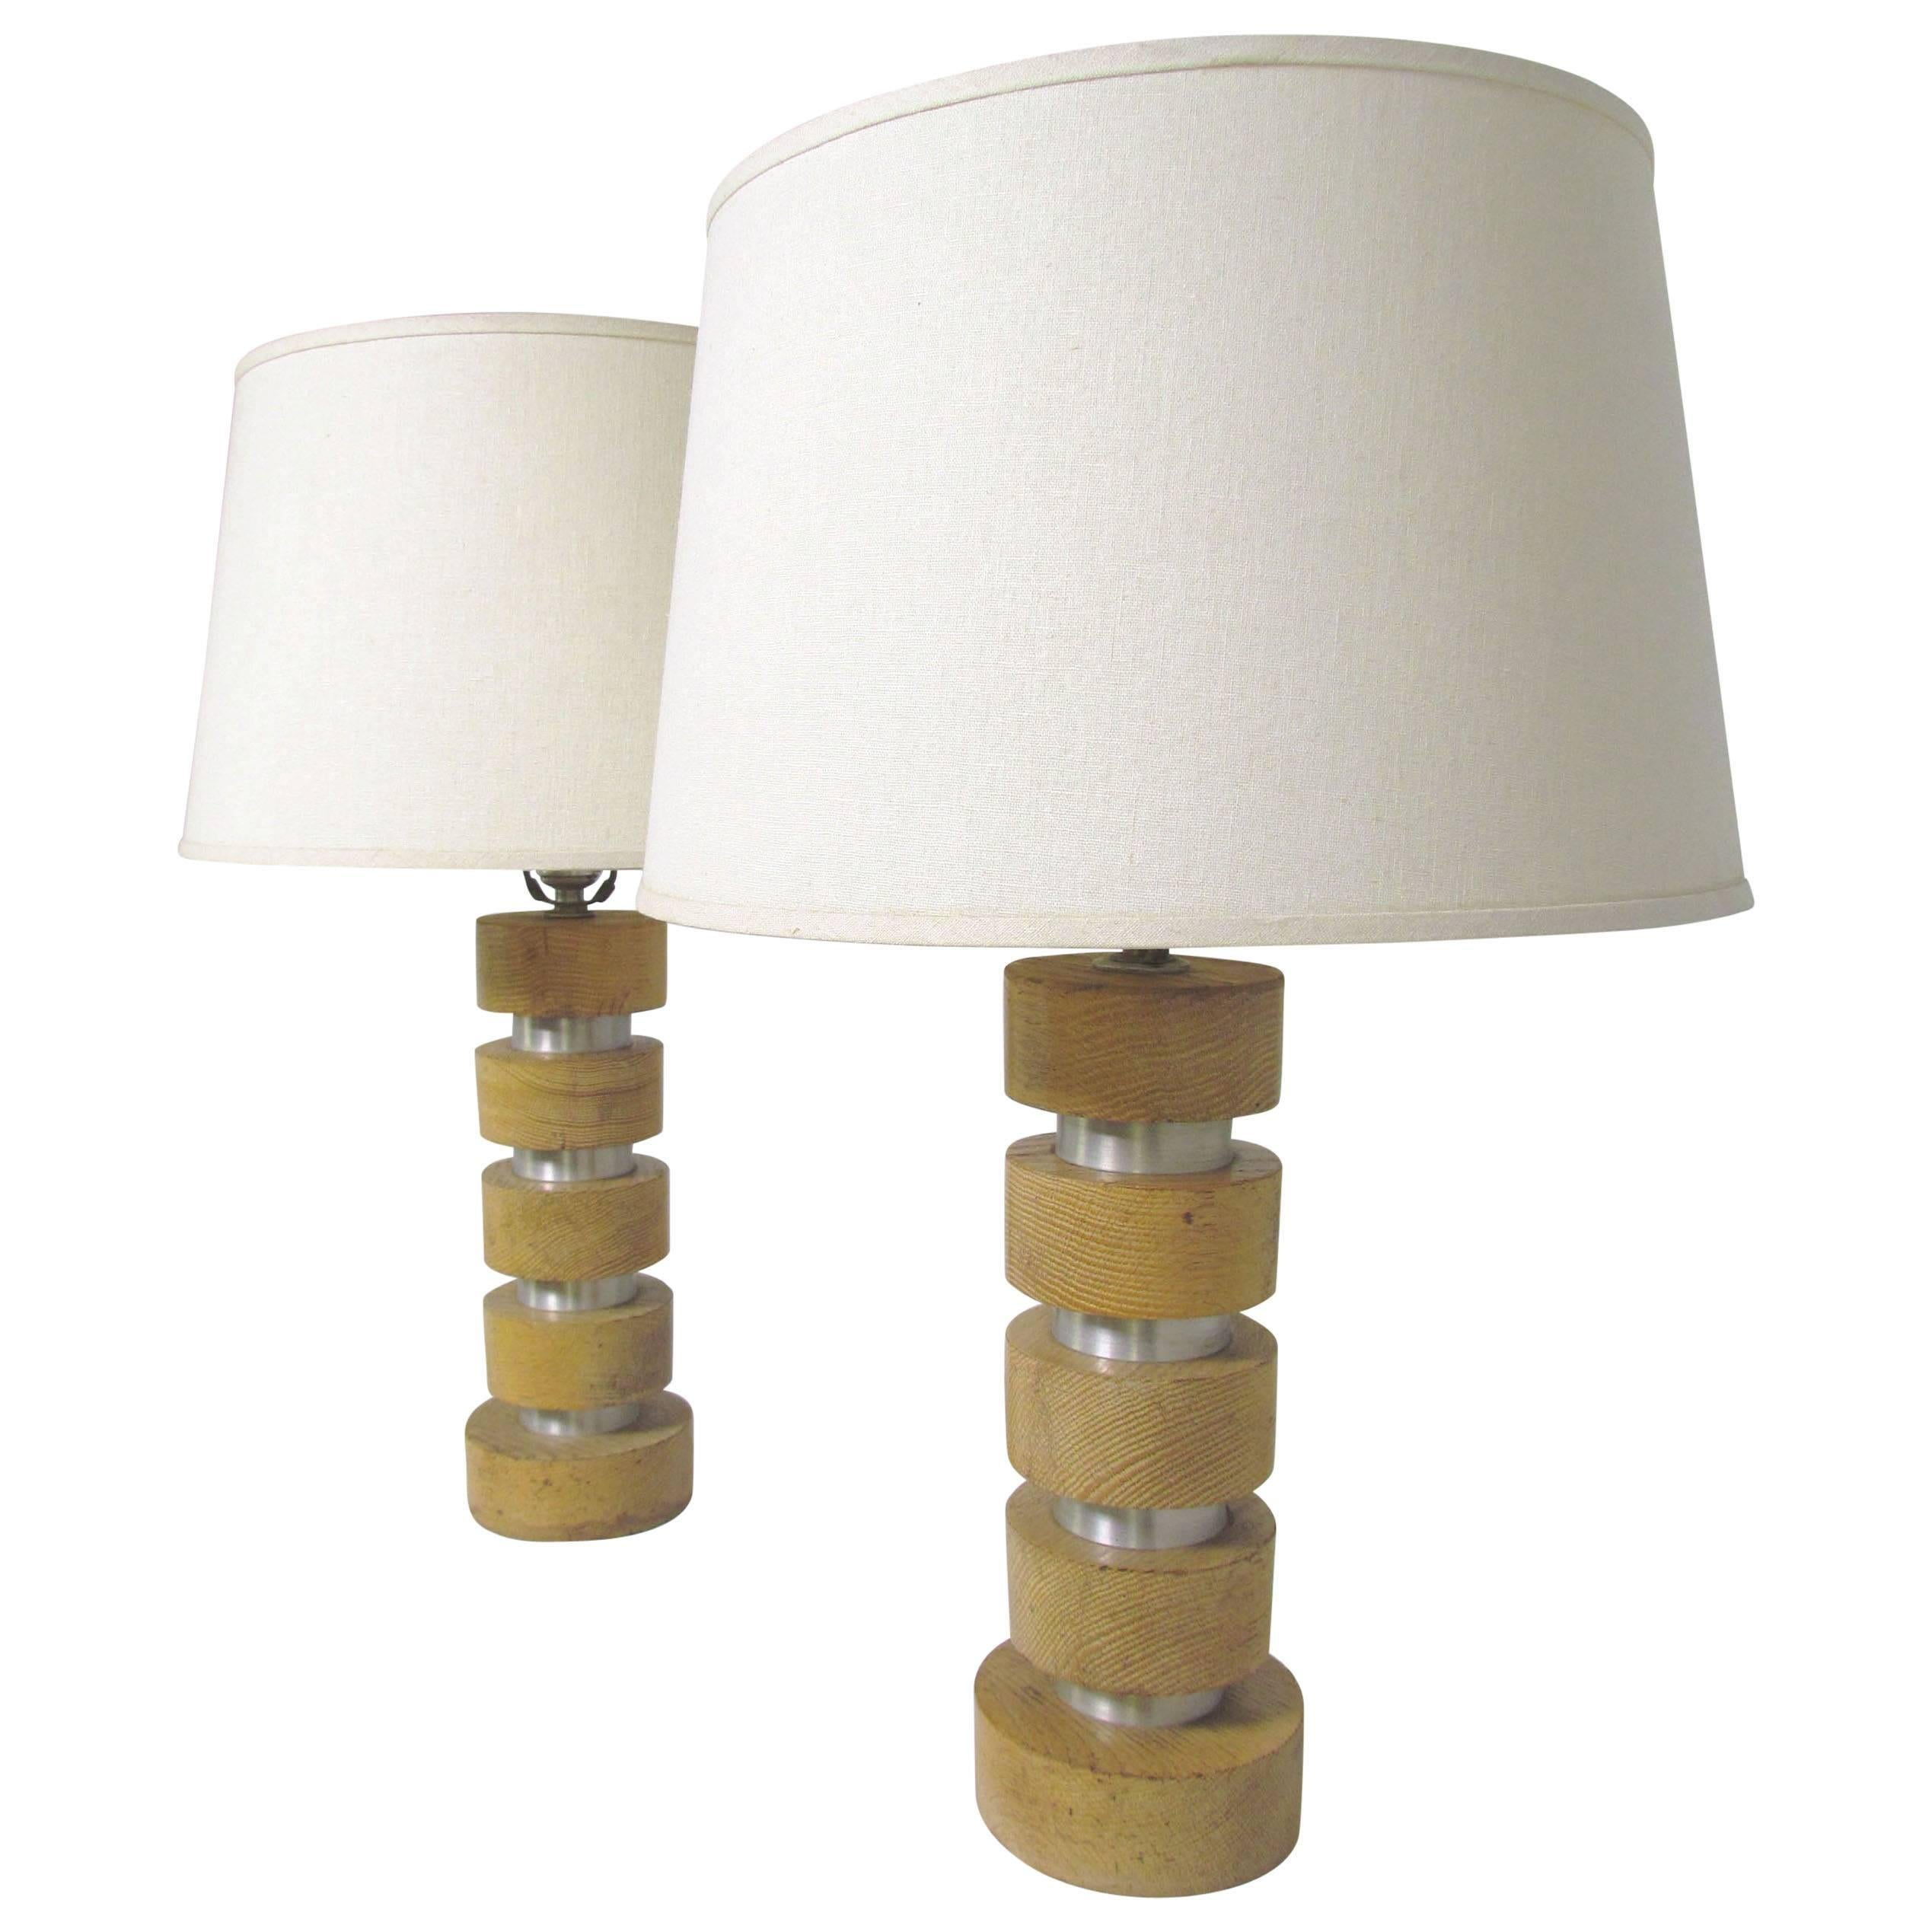 Pair of Spun Aluminum and Maple Table Lamps by Russel Wright